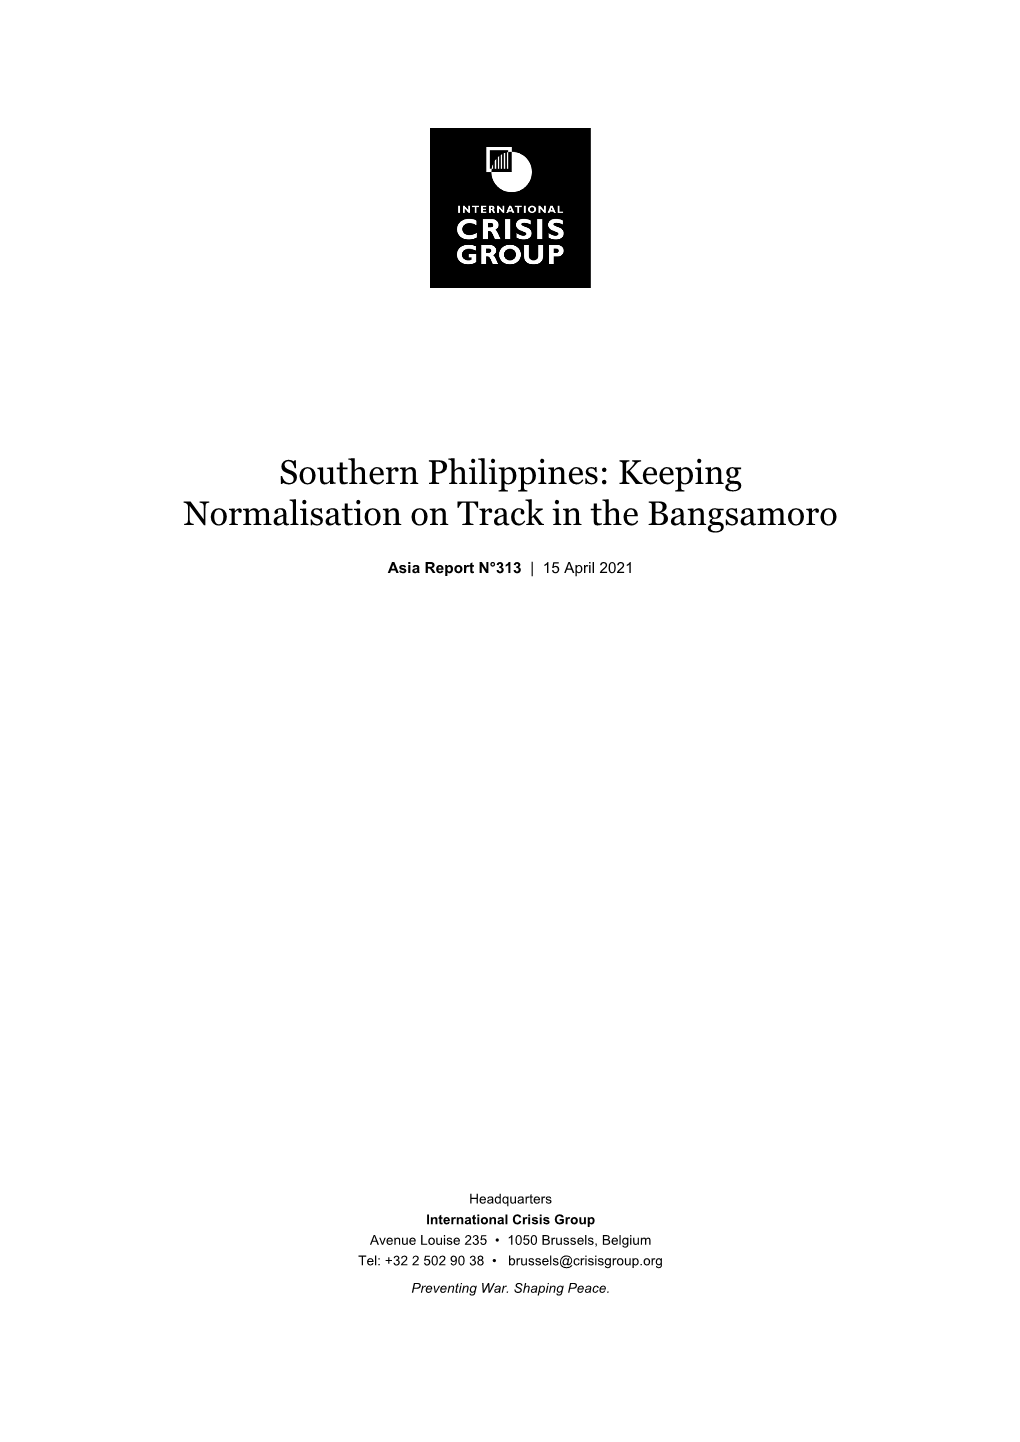 Southern Philippines: Keeping Normalisation on Track in the Bangsamoro